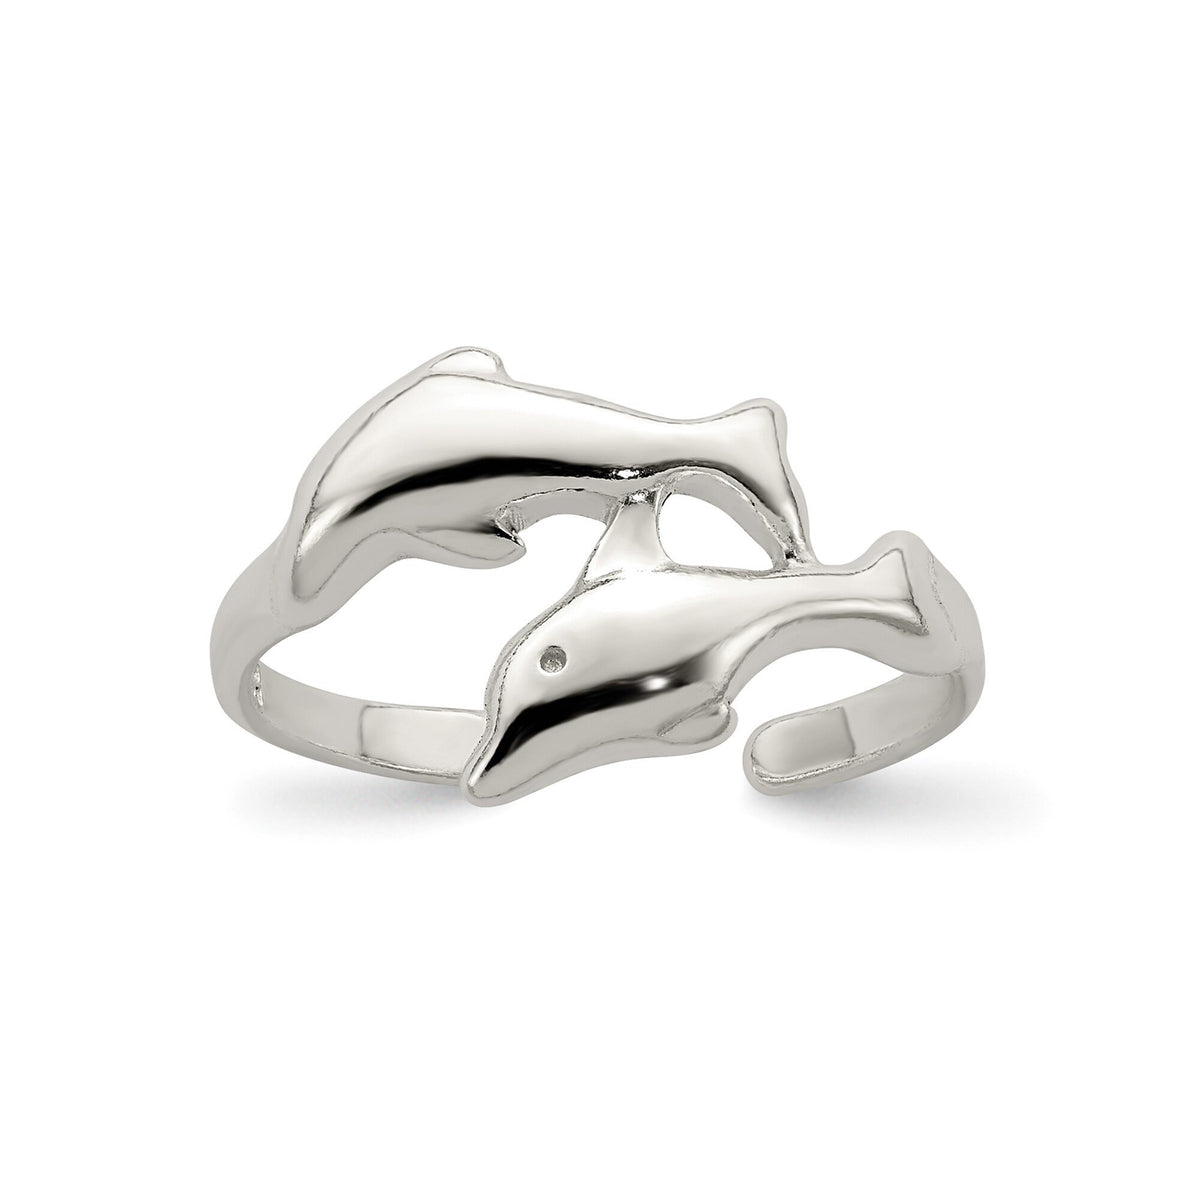 Sterling Silver Dolphin Toe Ring - Gift Box Included - Ships next Business Day